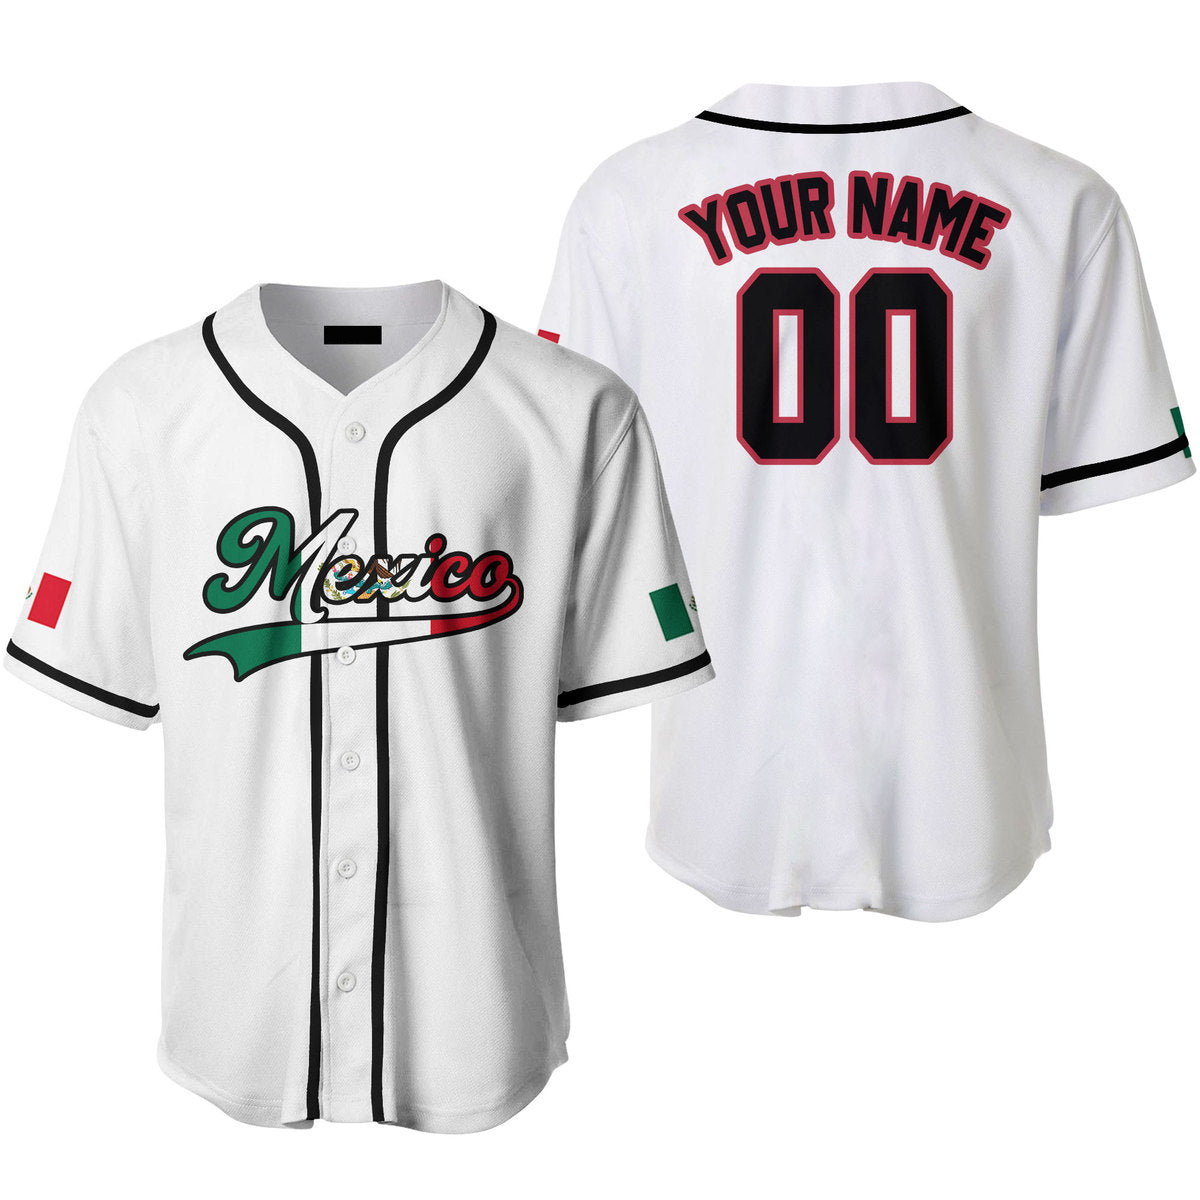 Mexico Text Pattern White Red Black Custom Name Baseball Jerseys/ Idea Gift for Mexican